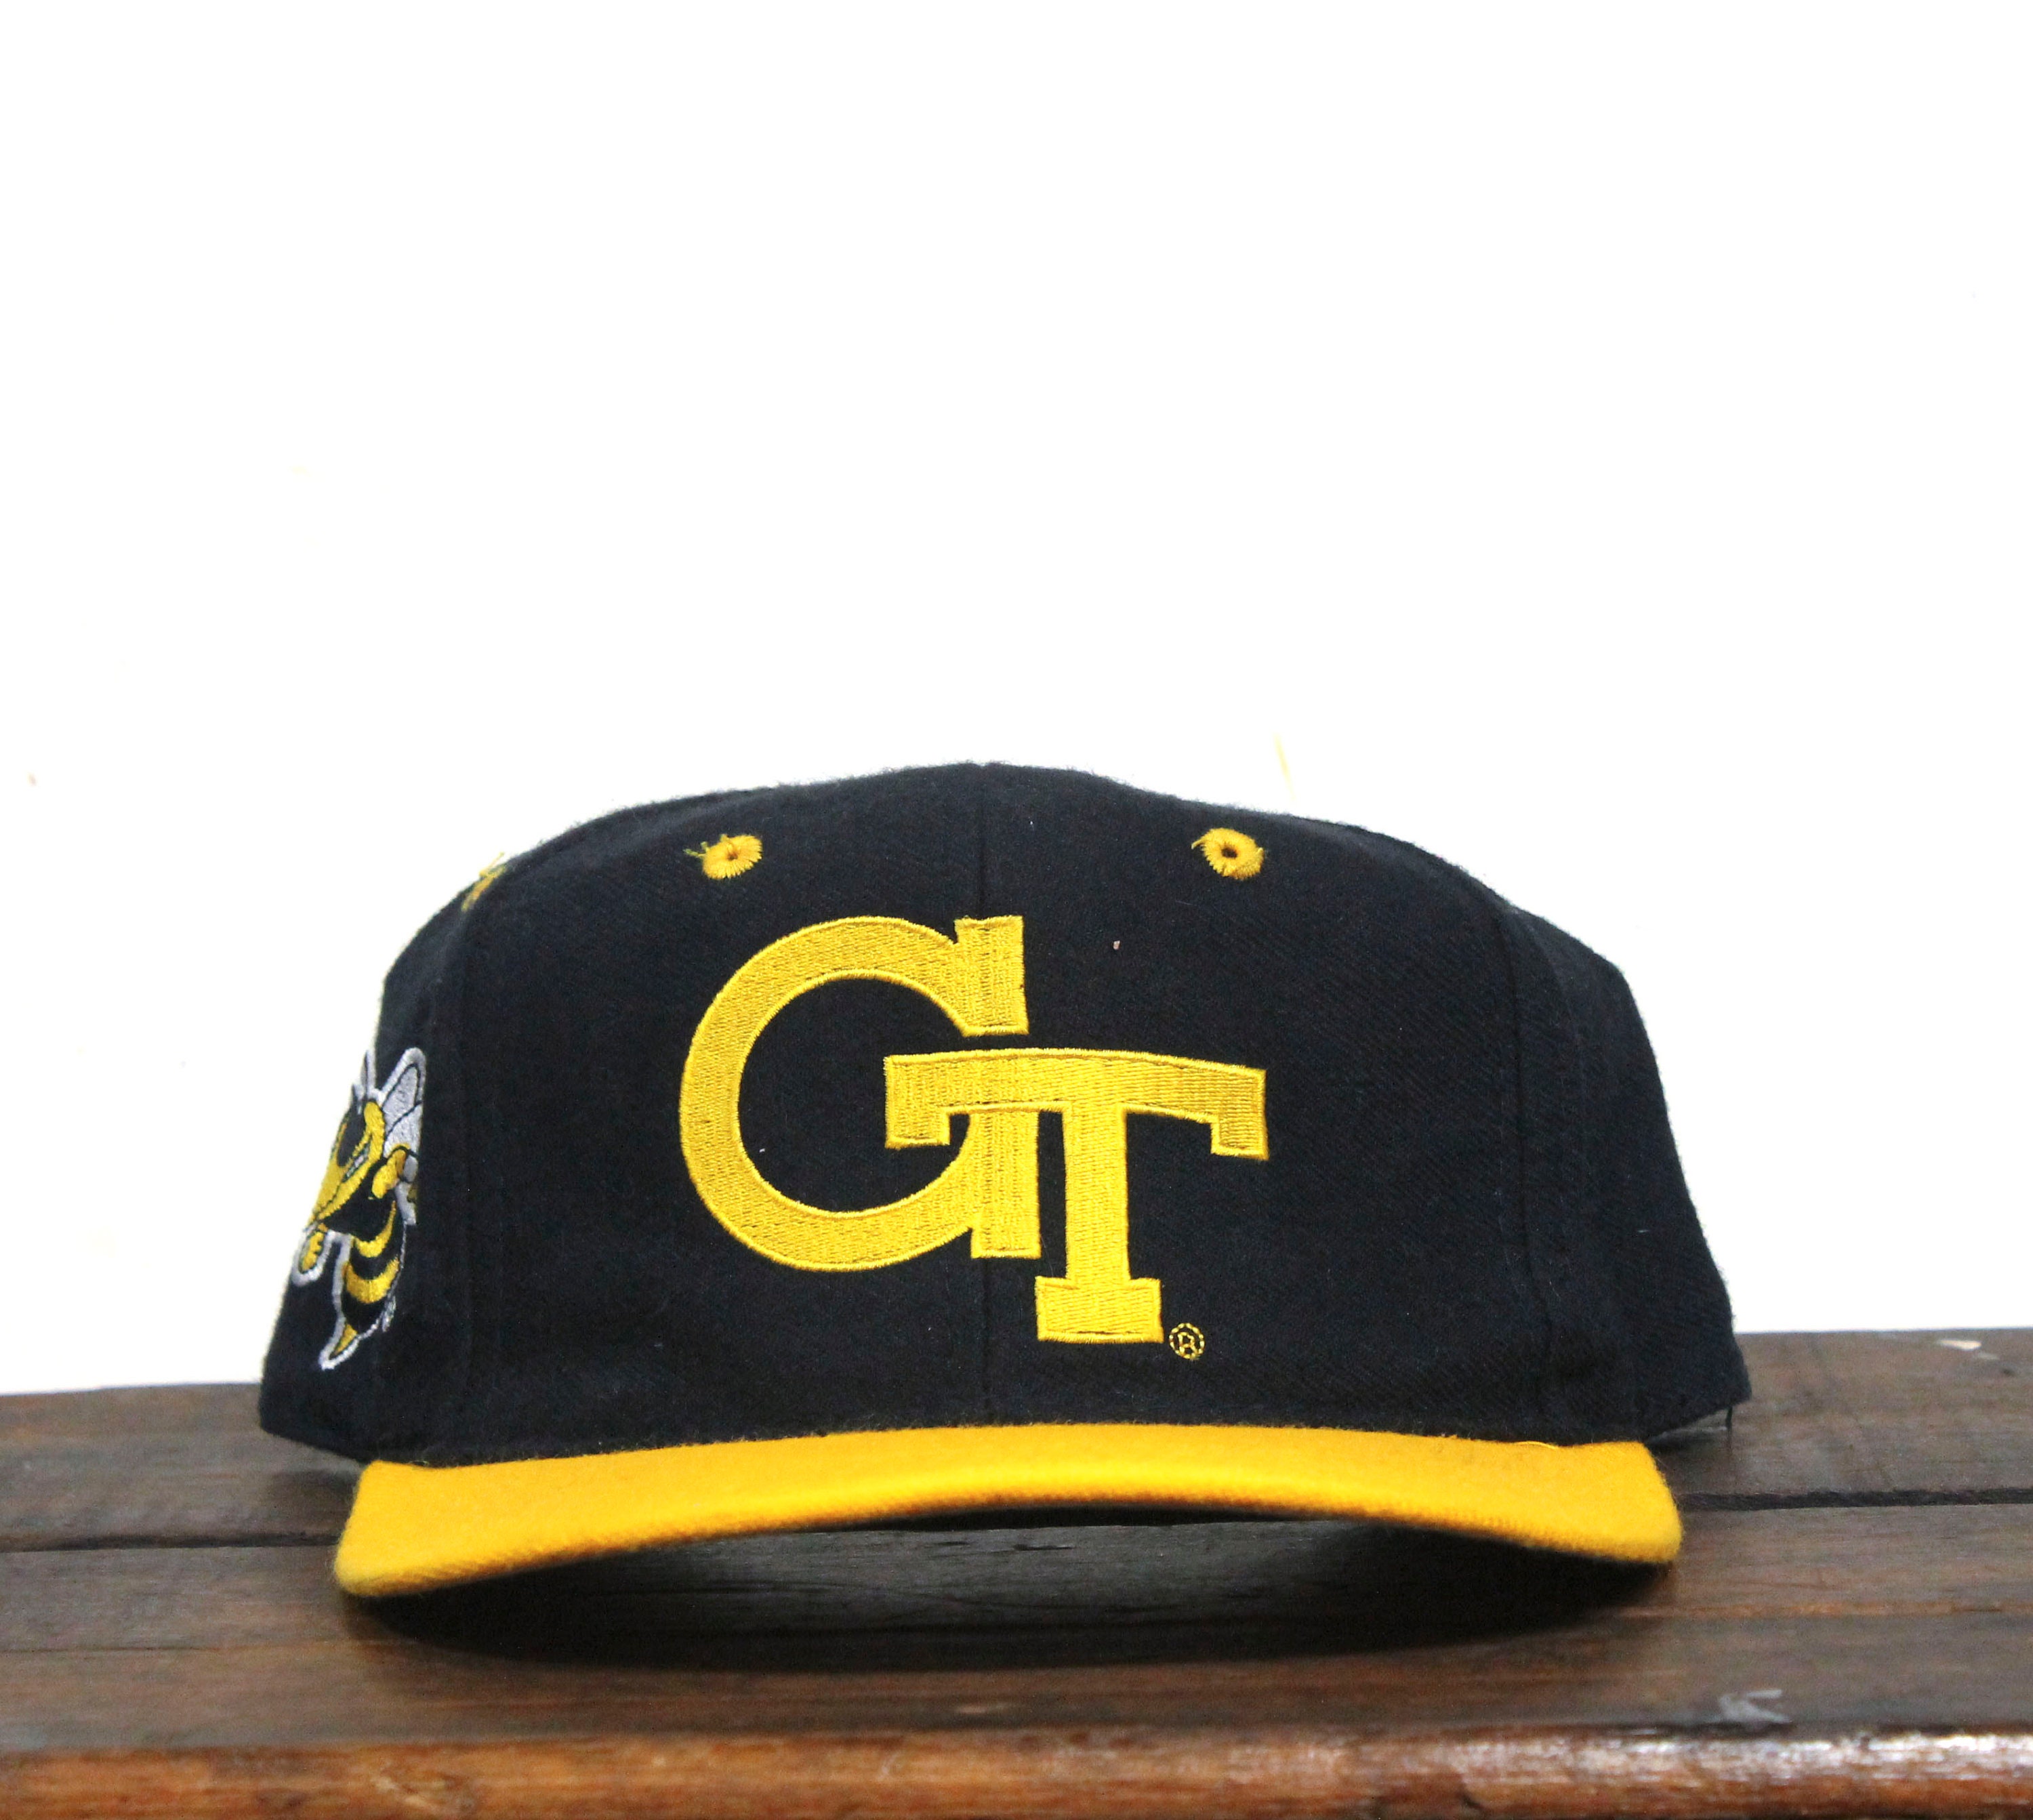 frankford yellow jackets hat